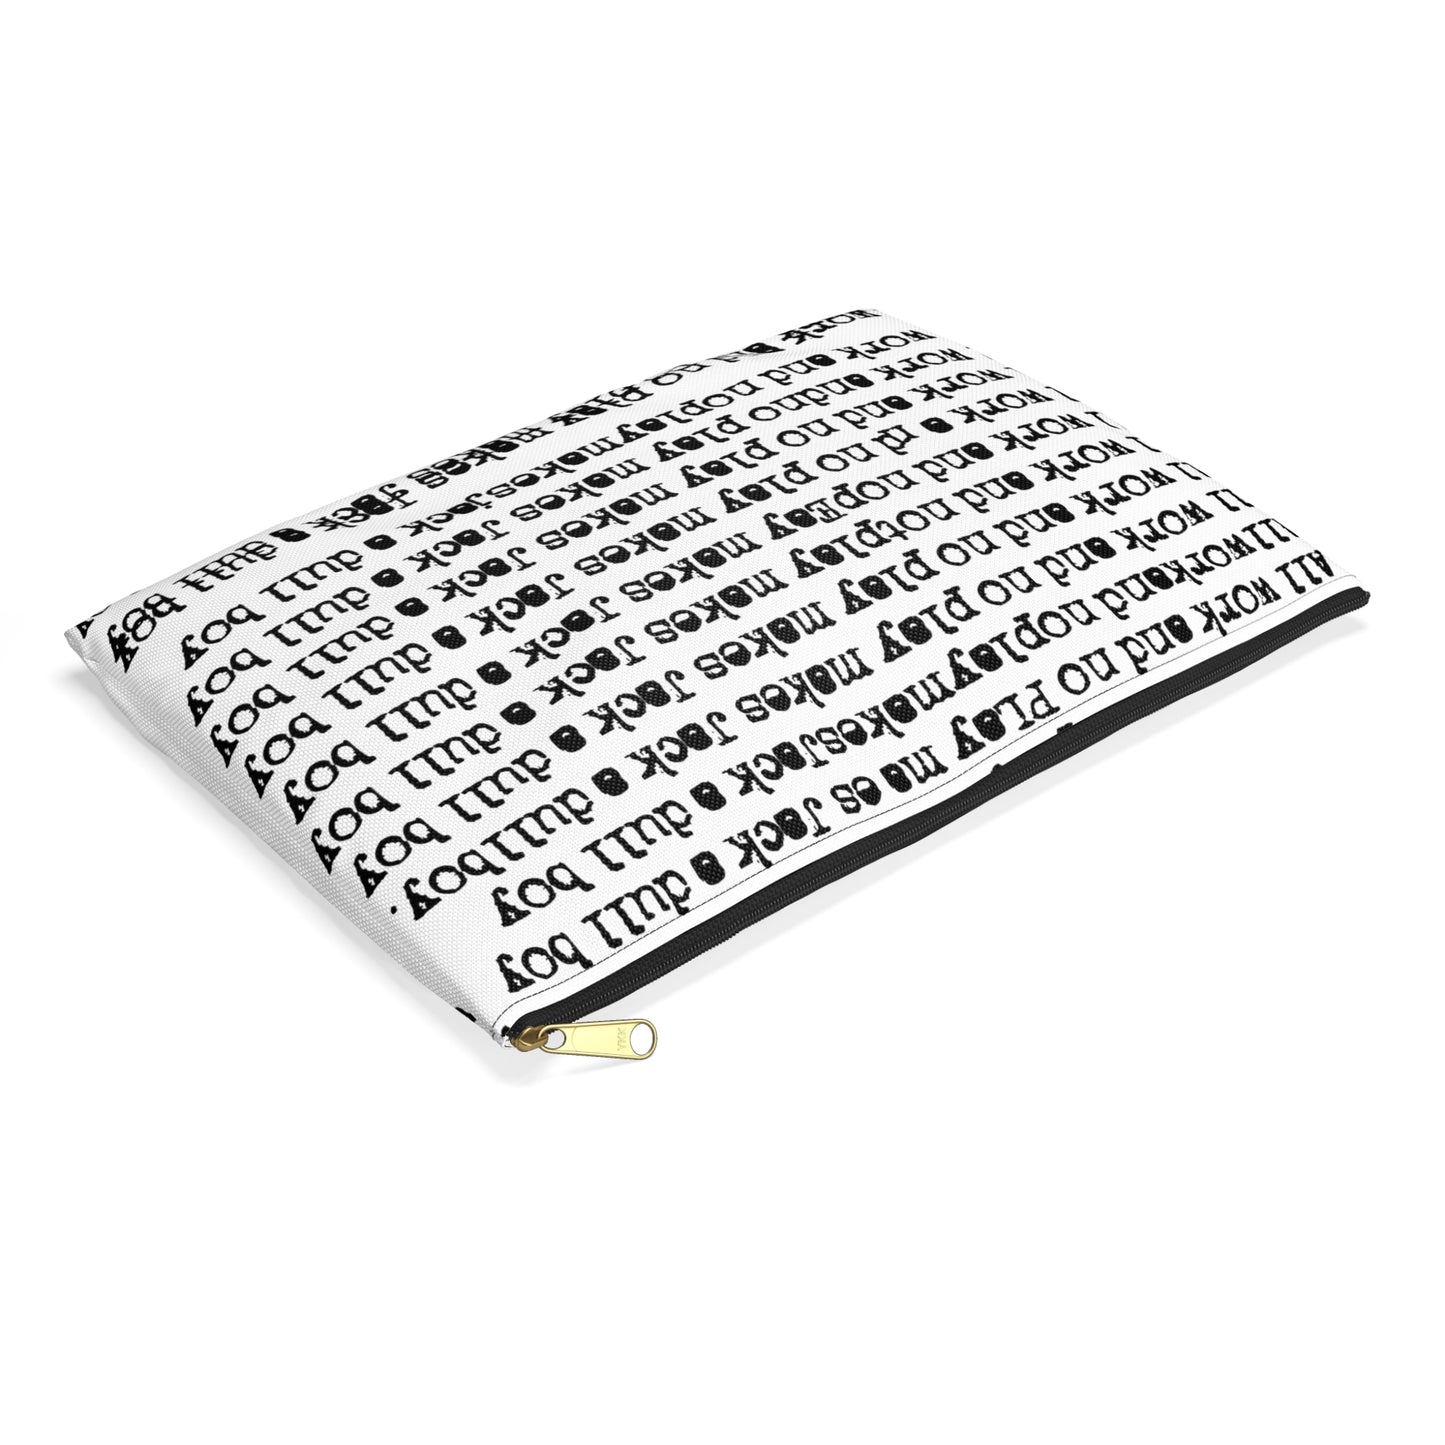 All Work and No Play Pencil Case